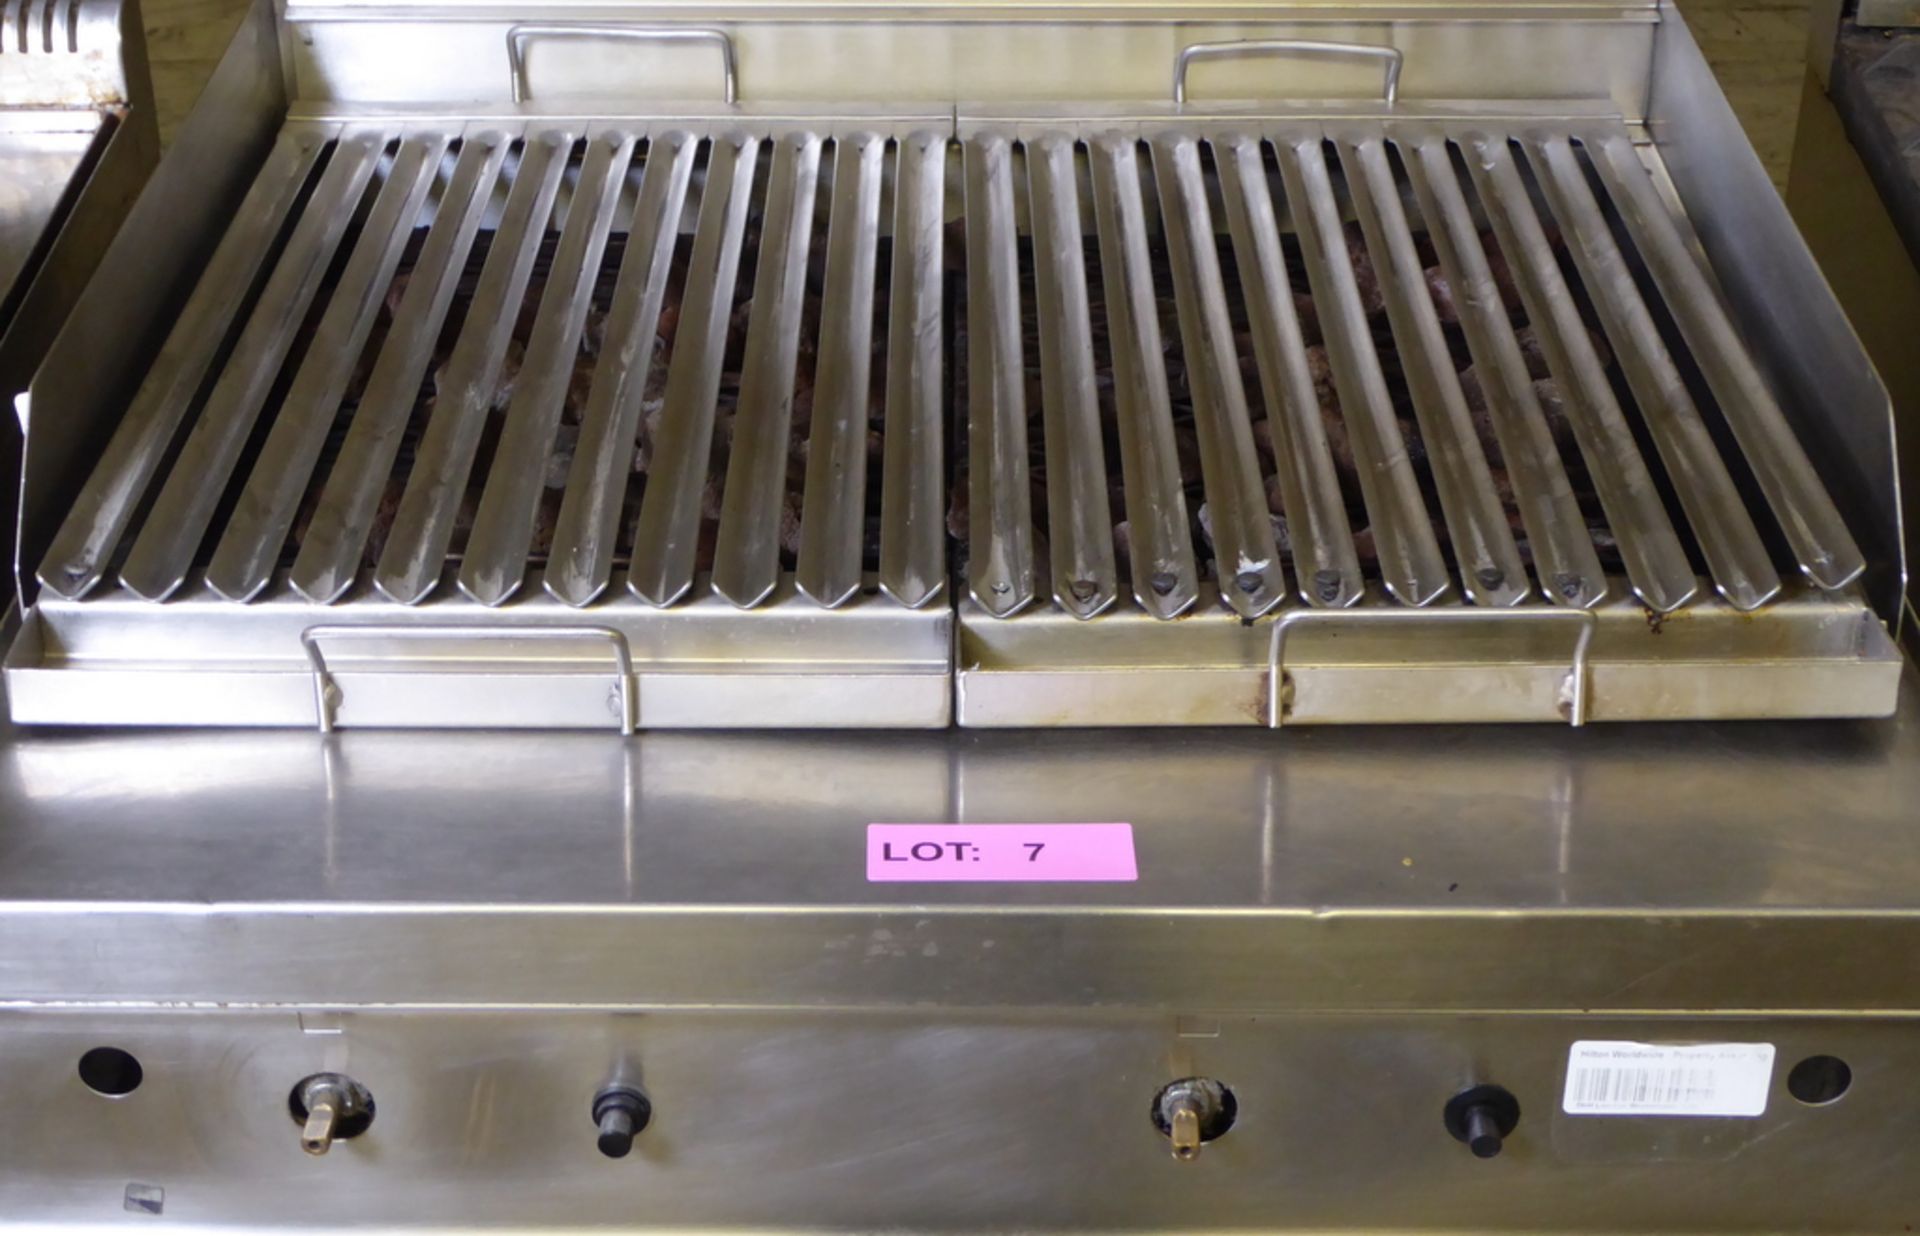 Ambach Gas Chargrill 68 x 76 x 92cm (WxDxH) - Please note that the knobs are missing - Image 2 of 6